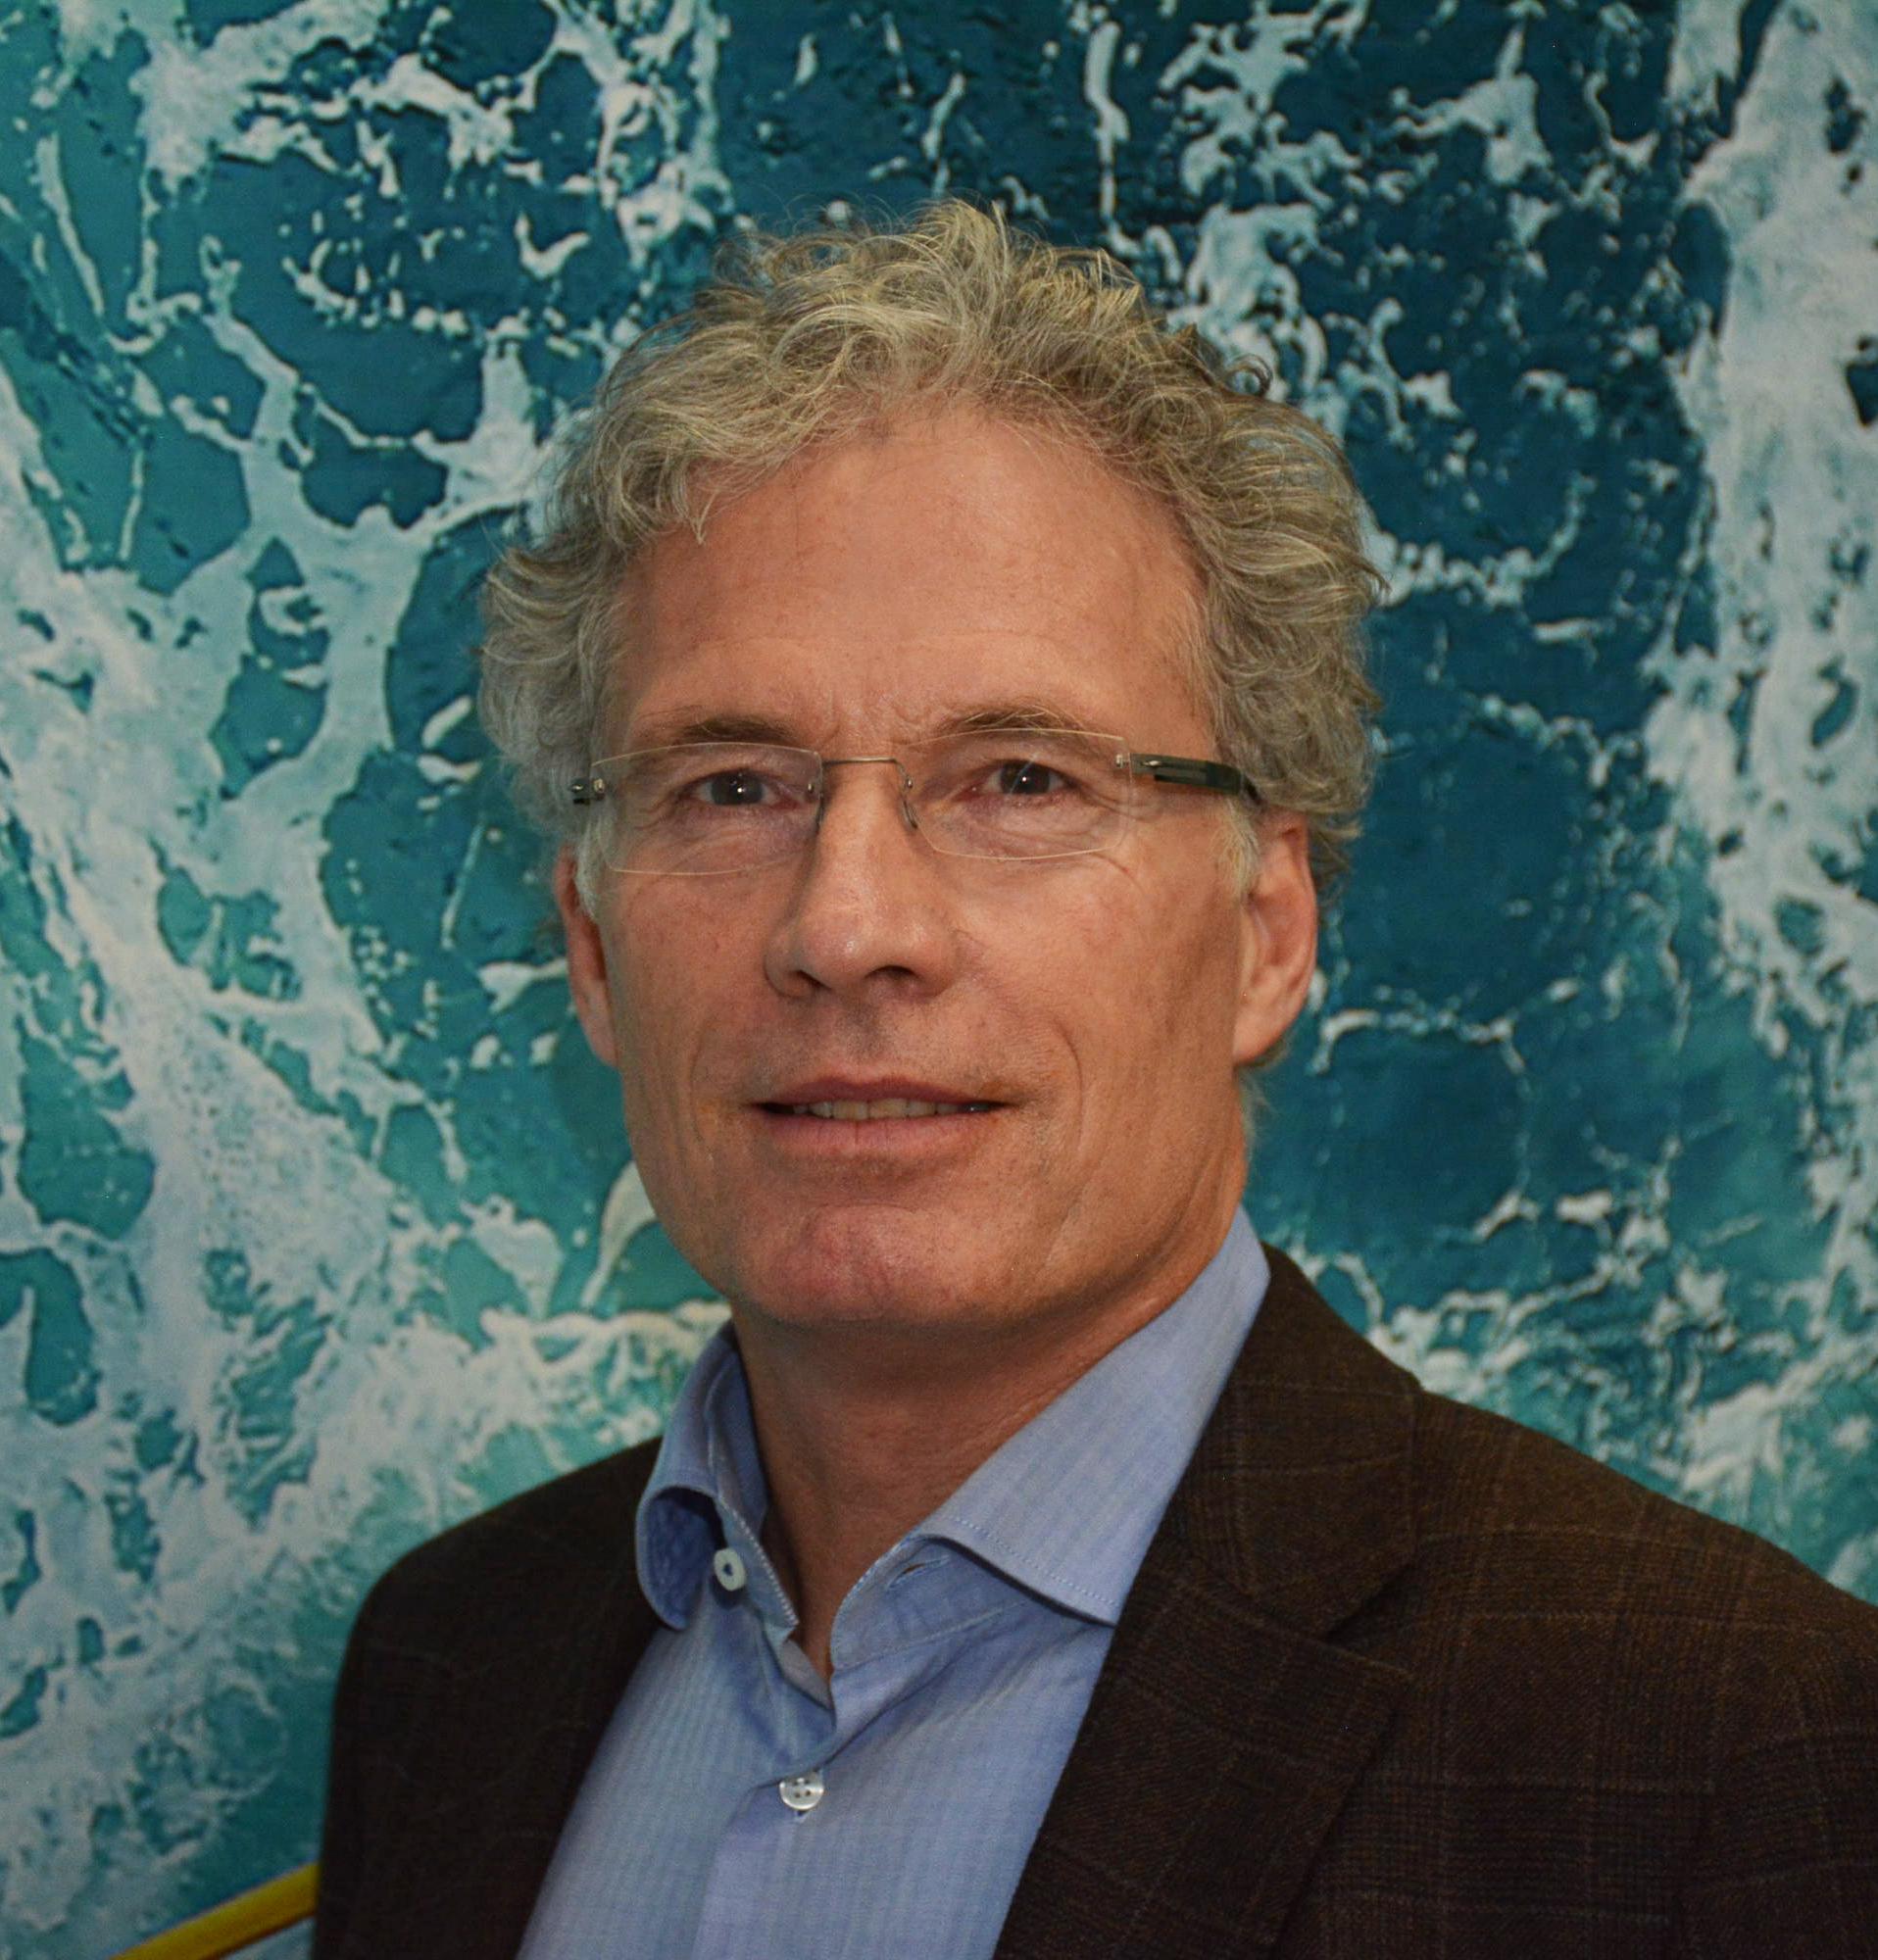 Contact Peter Willem Hatenboer, Chairman at Hatenboer-Neptunus Holding